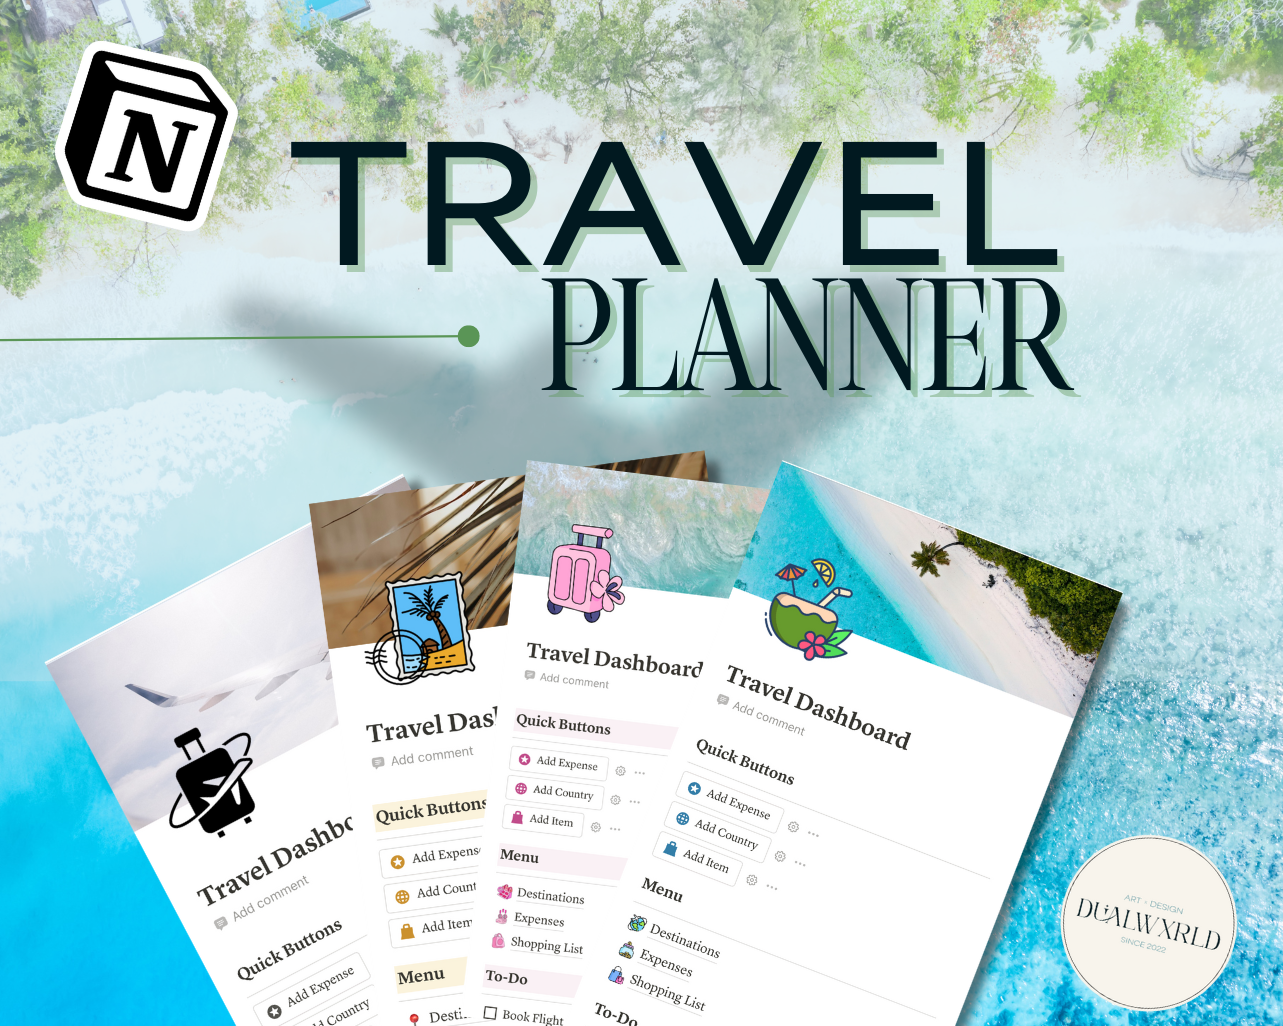 Track your adventures, manage finances, plan outfits, learn languages, and collaborate effortlessly. Easy to use, straightforward, and perfect for all your travel needs.